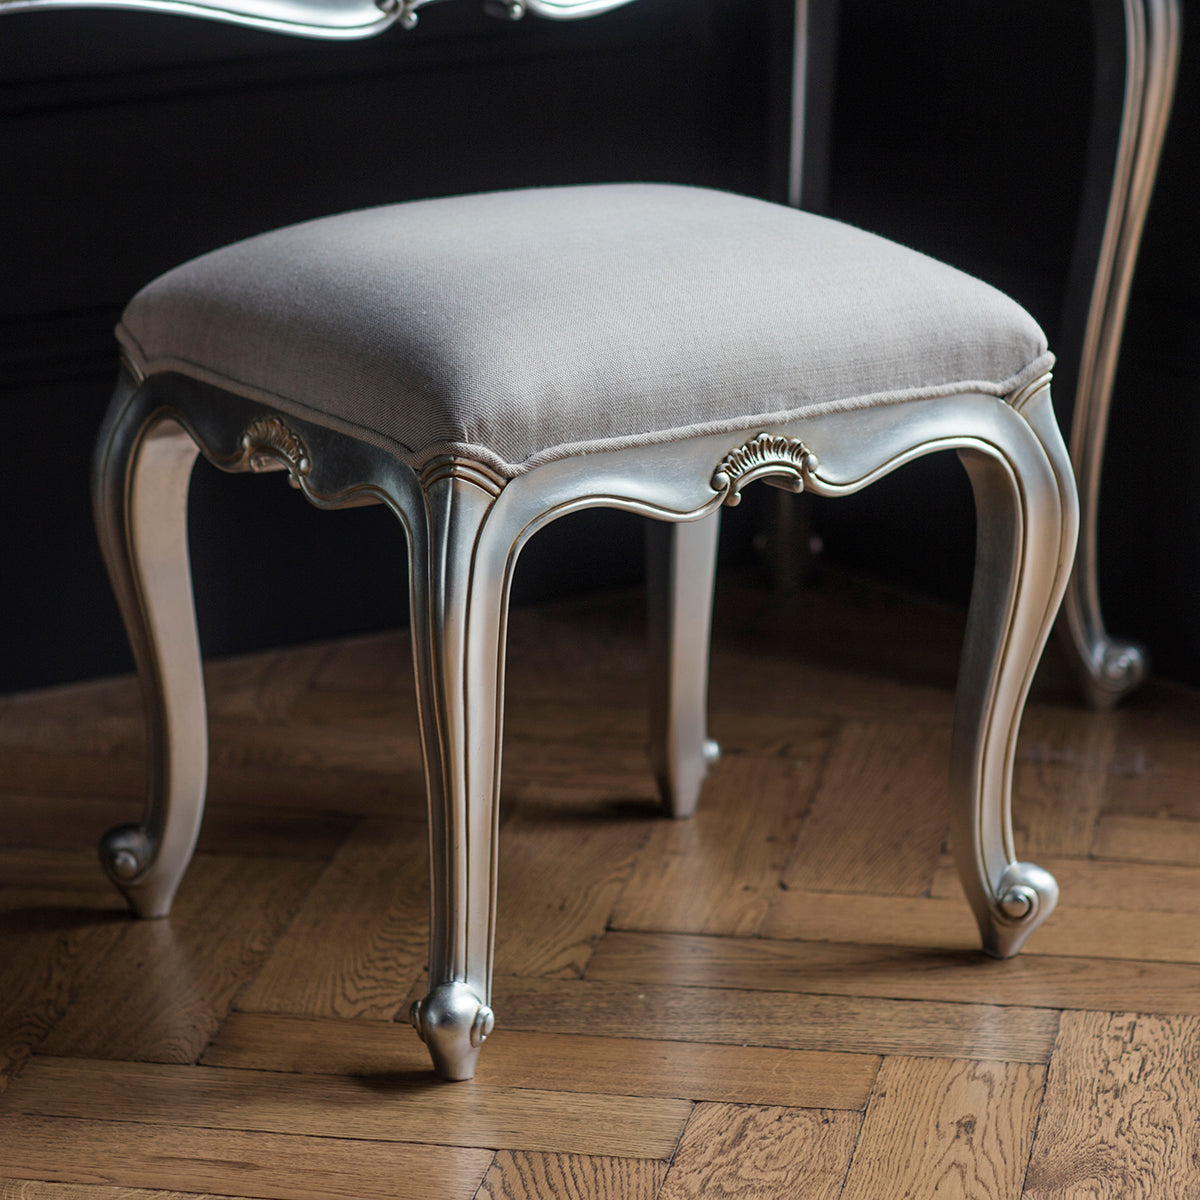 A Holne Dressing Stool Silver 470x450x400mm upholstered stool with a mirror on top from Kikiathome.co.uk, perfect for interior decor.